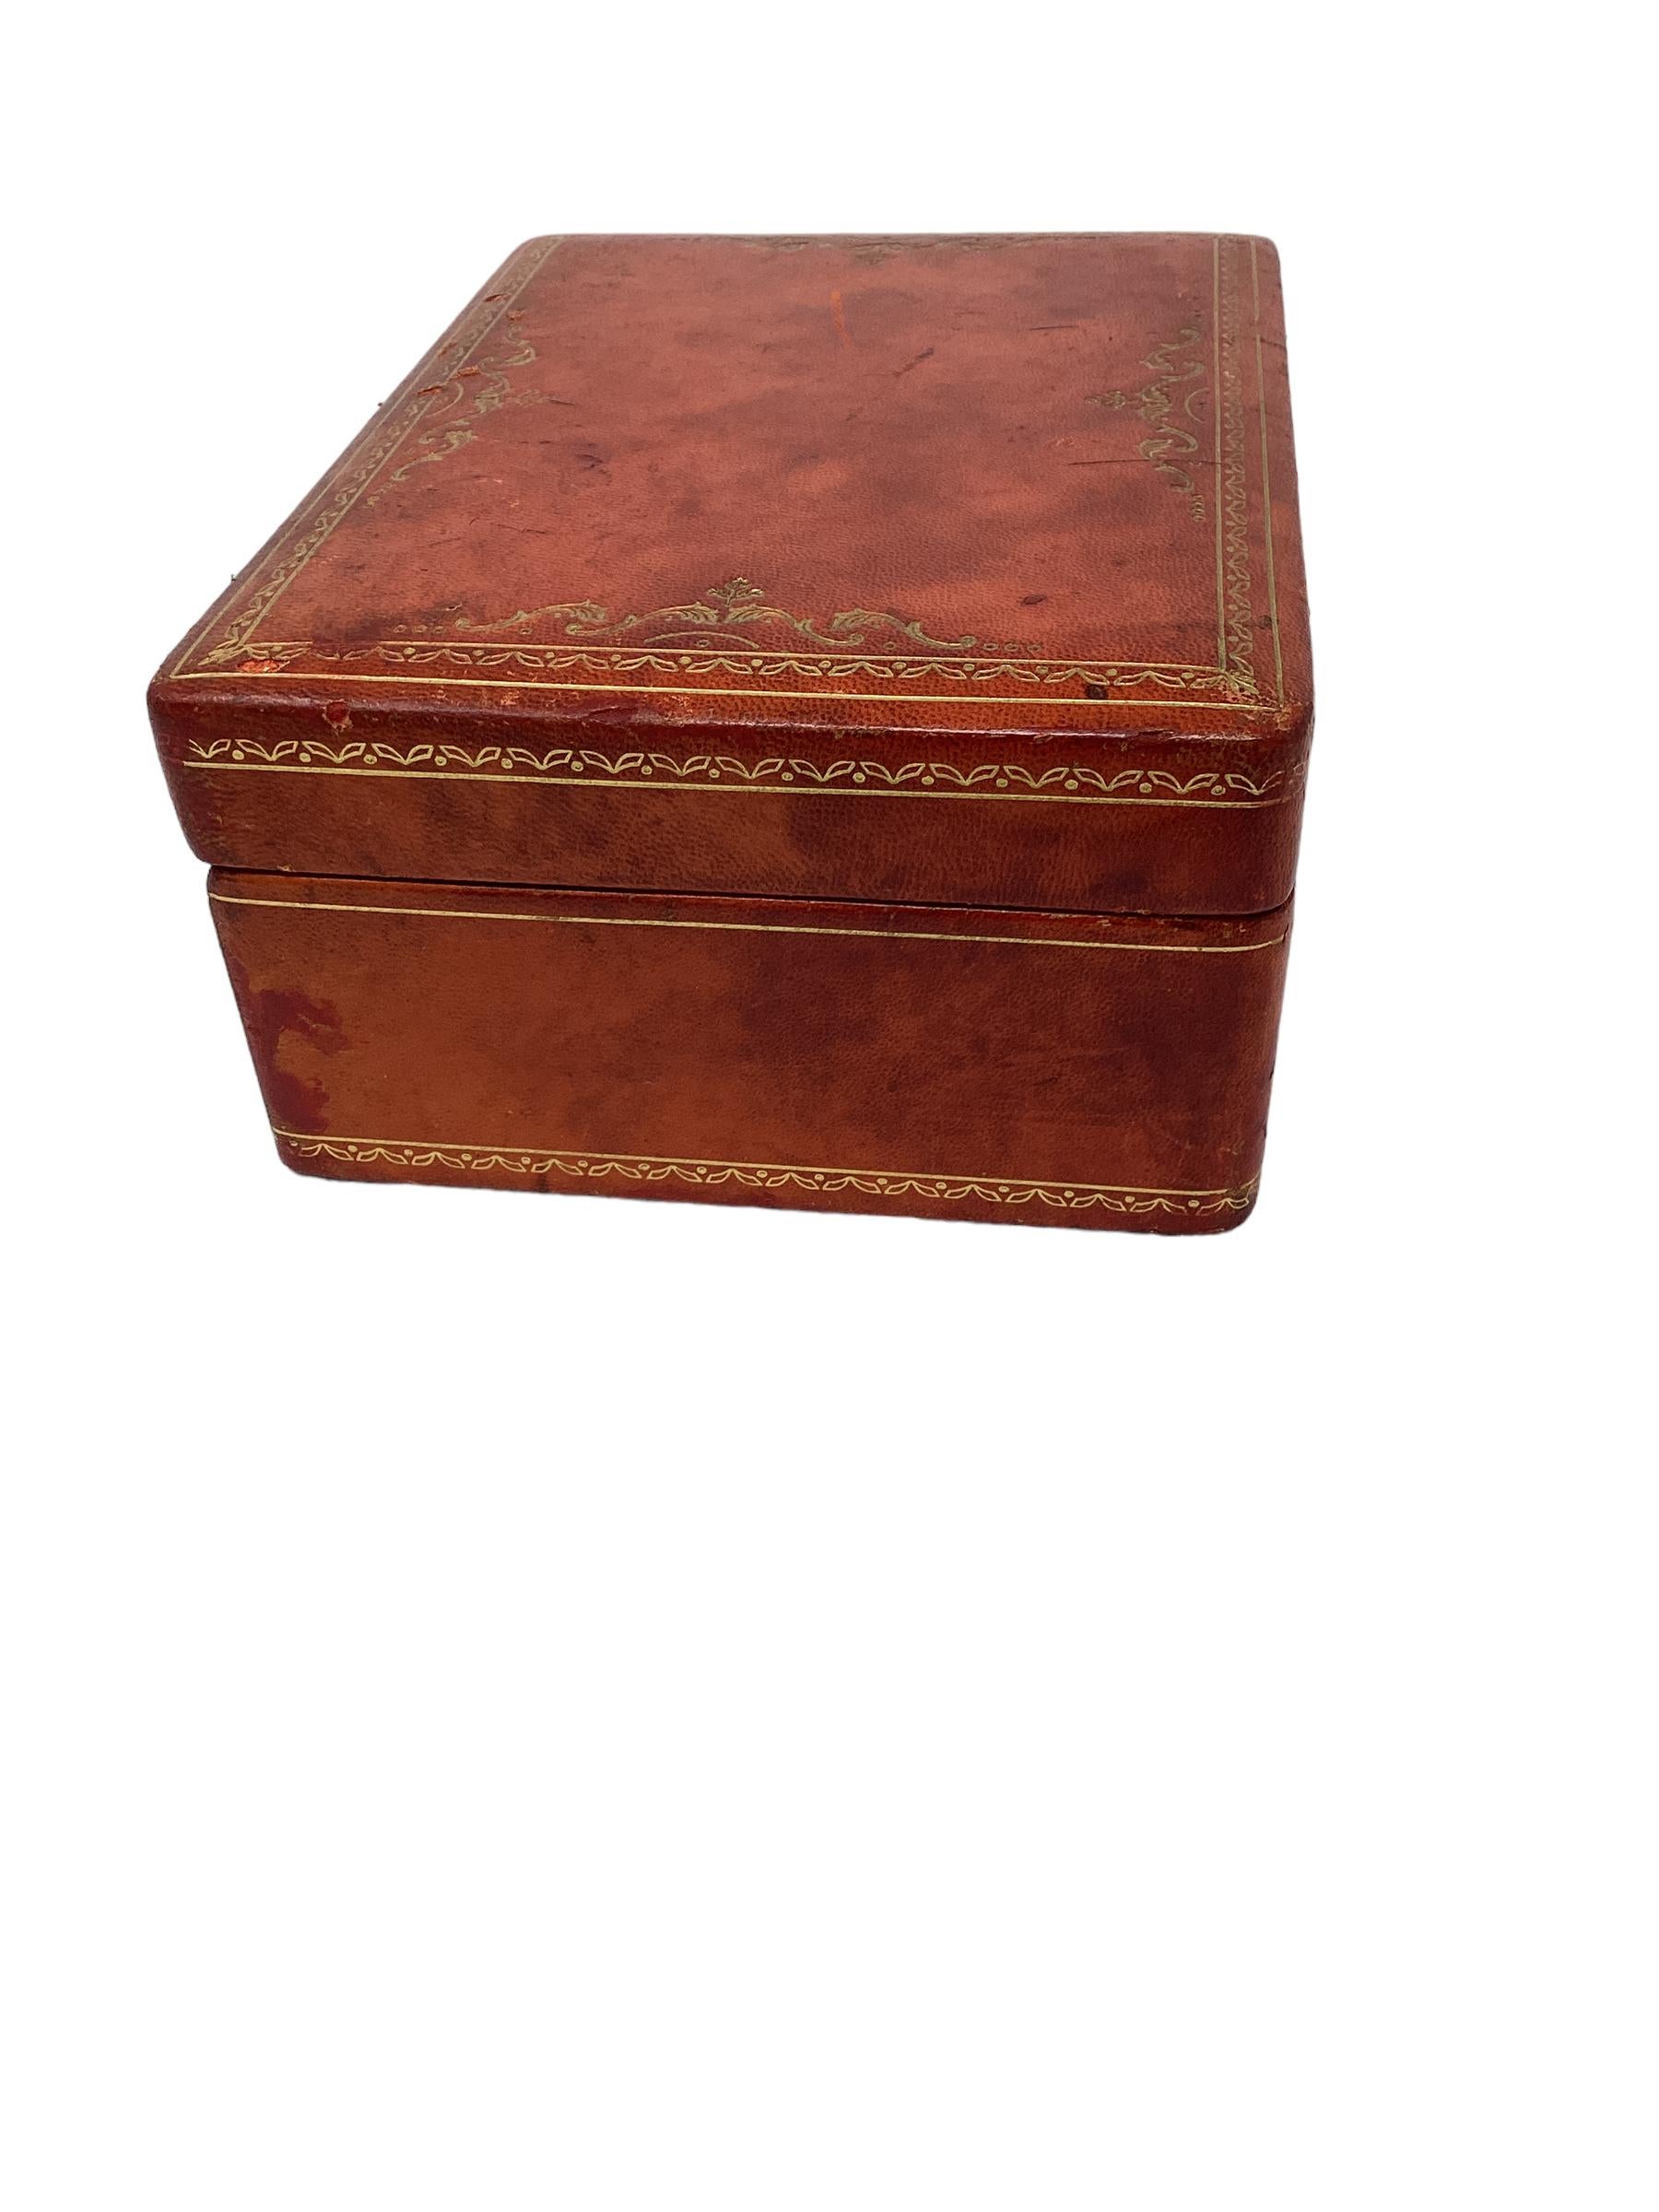 Mid-Century Modern Italian Red Leather Jewelry Box with Gold Tooling 